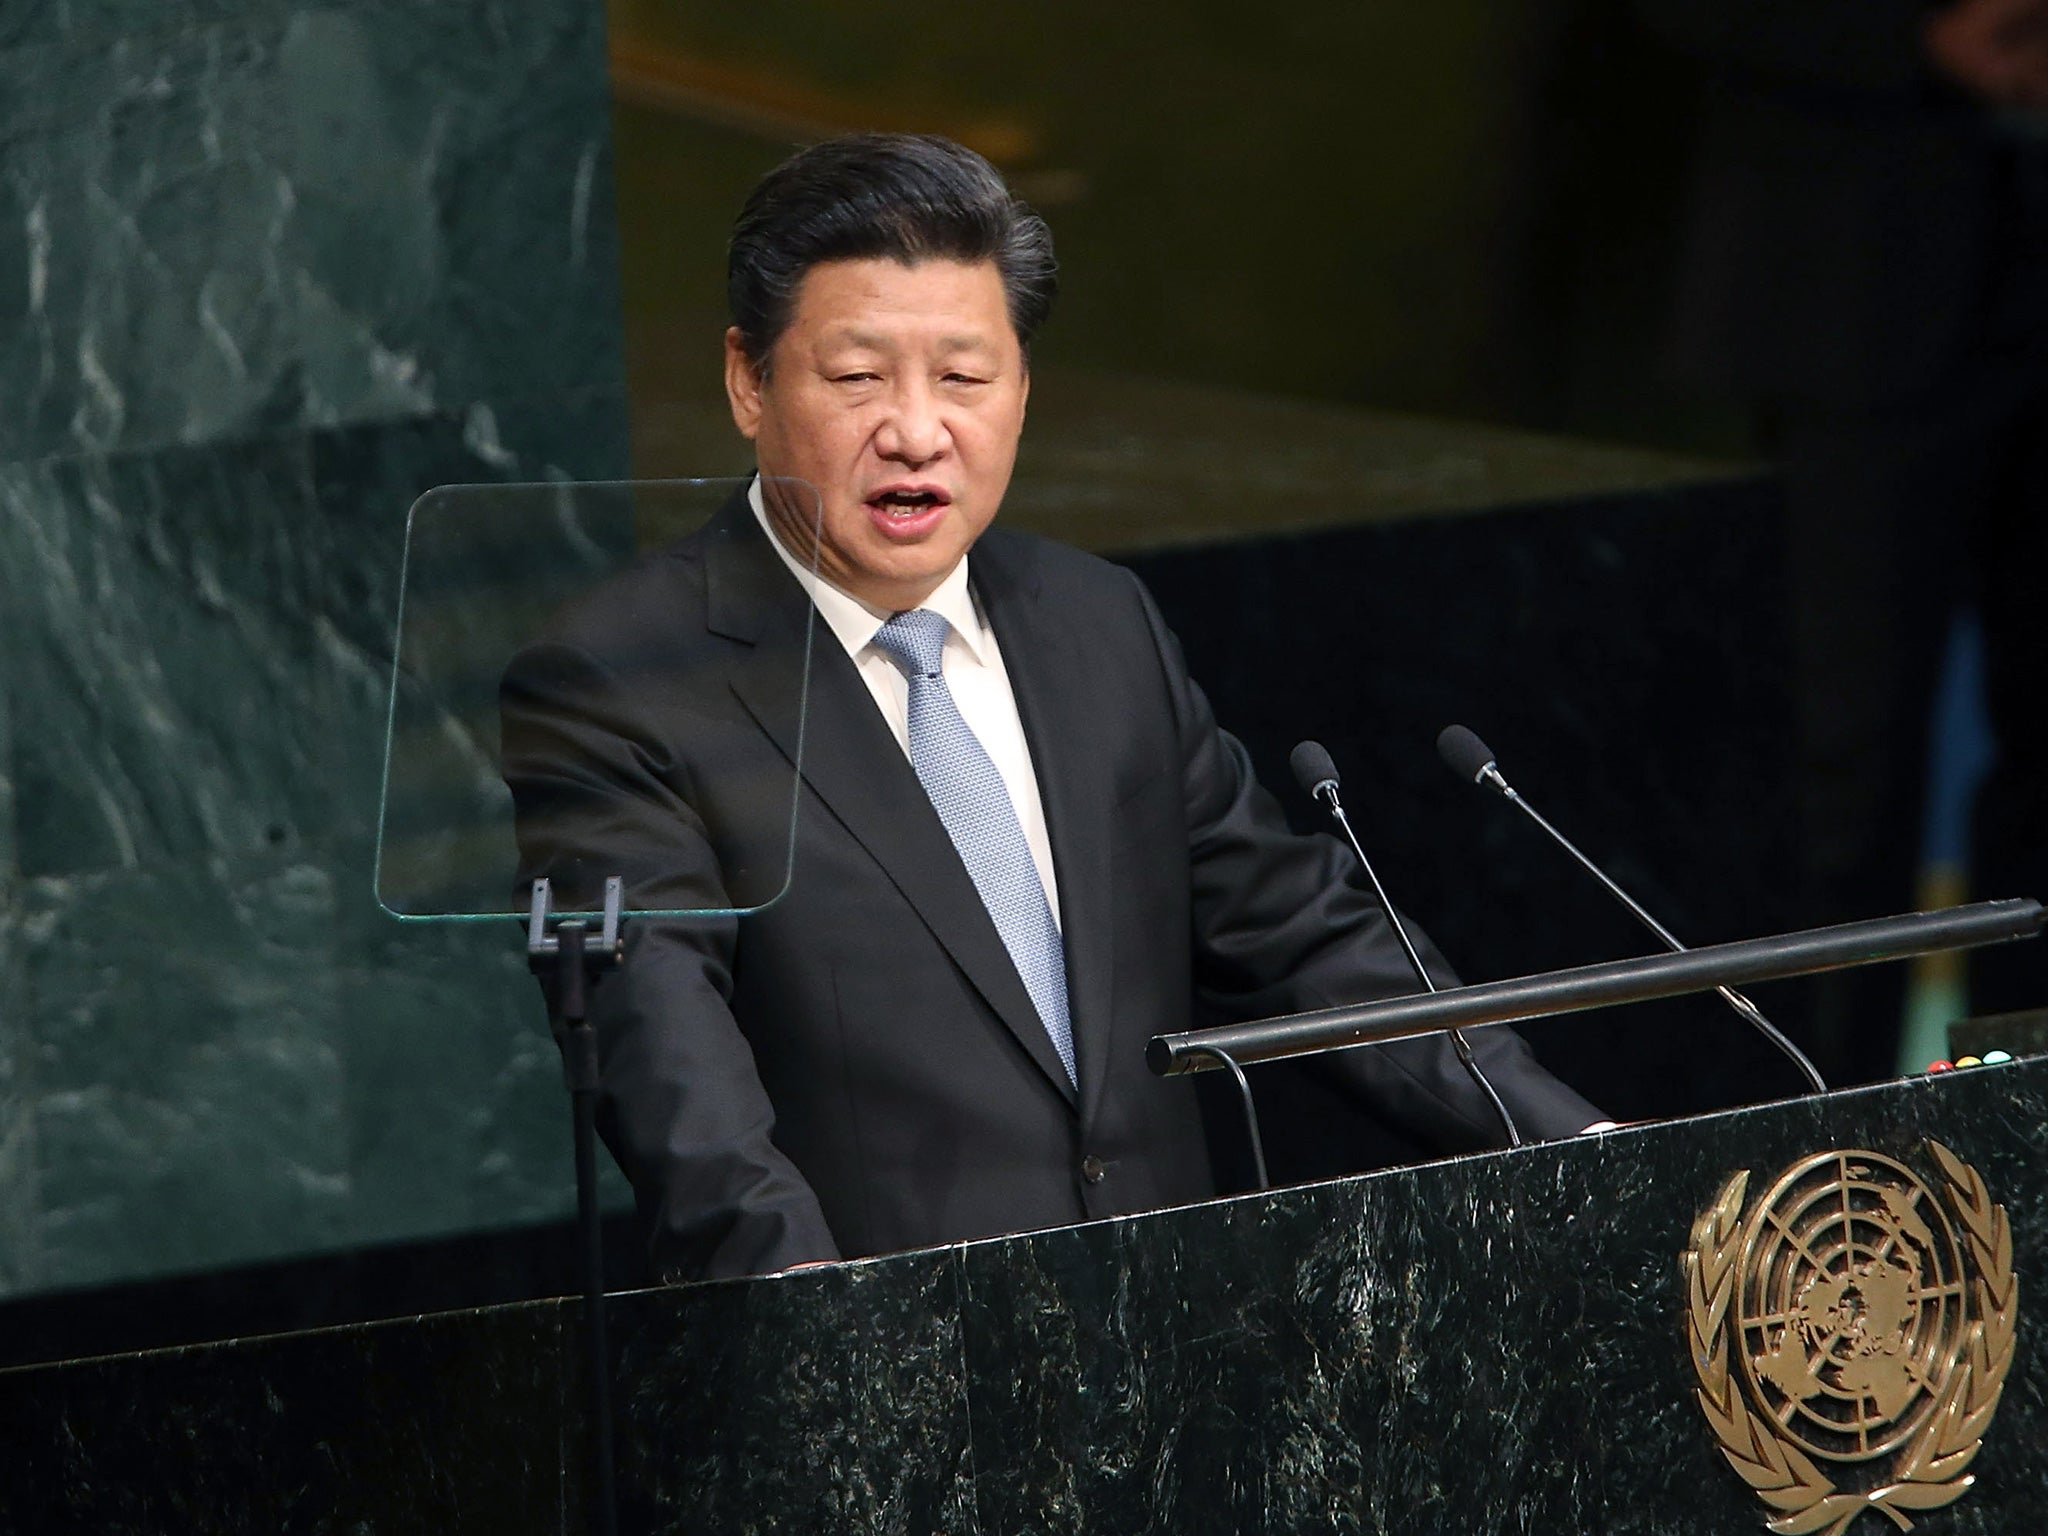 Xi Jinping's visit will be the first to the UK by a Chinese President since 2005